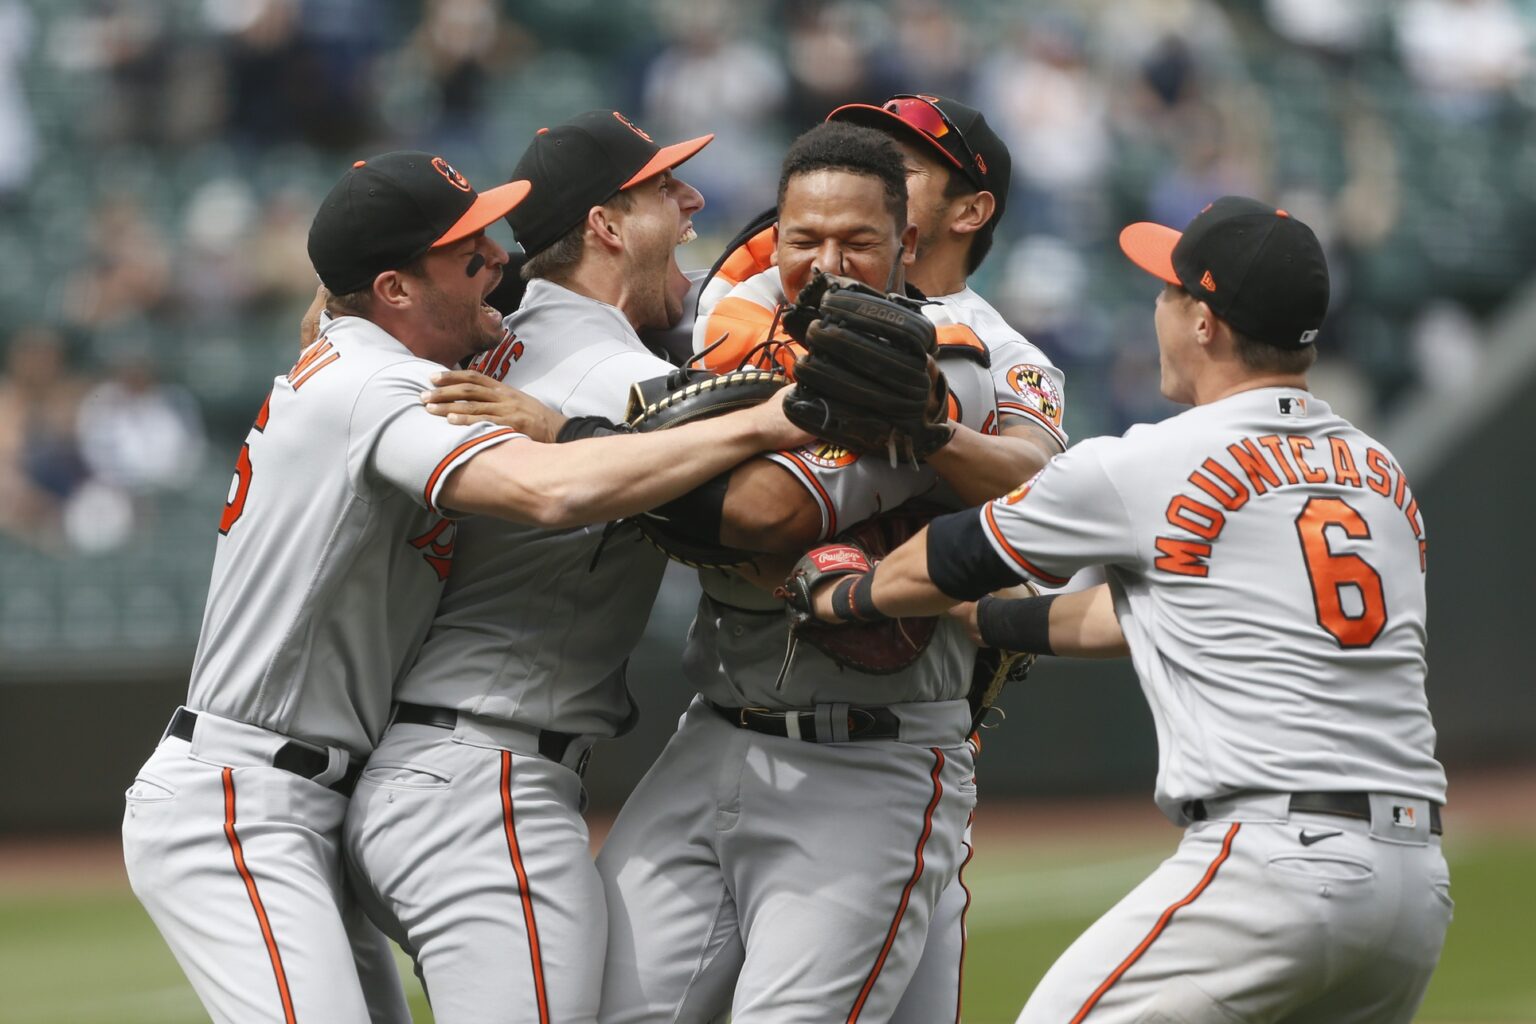 Orioles pitching coach Holt gives credit to Means after nohitter